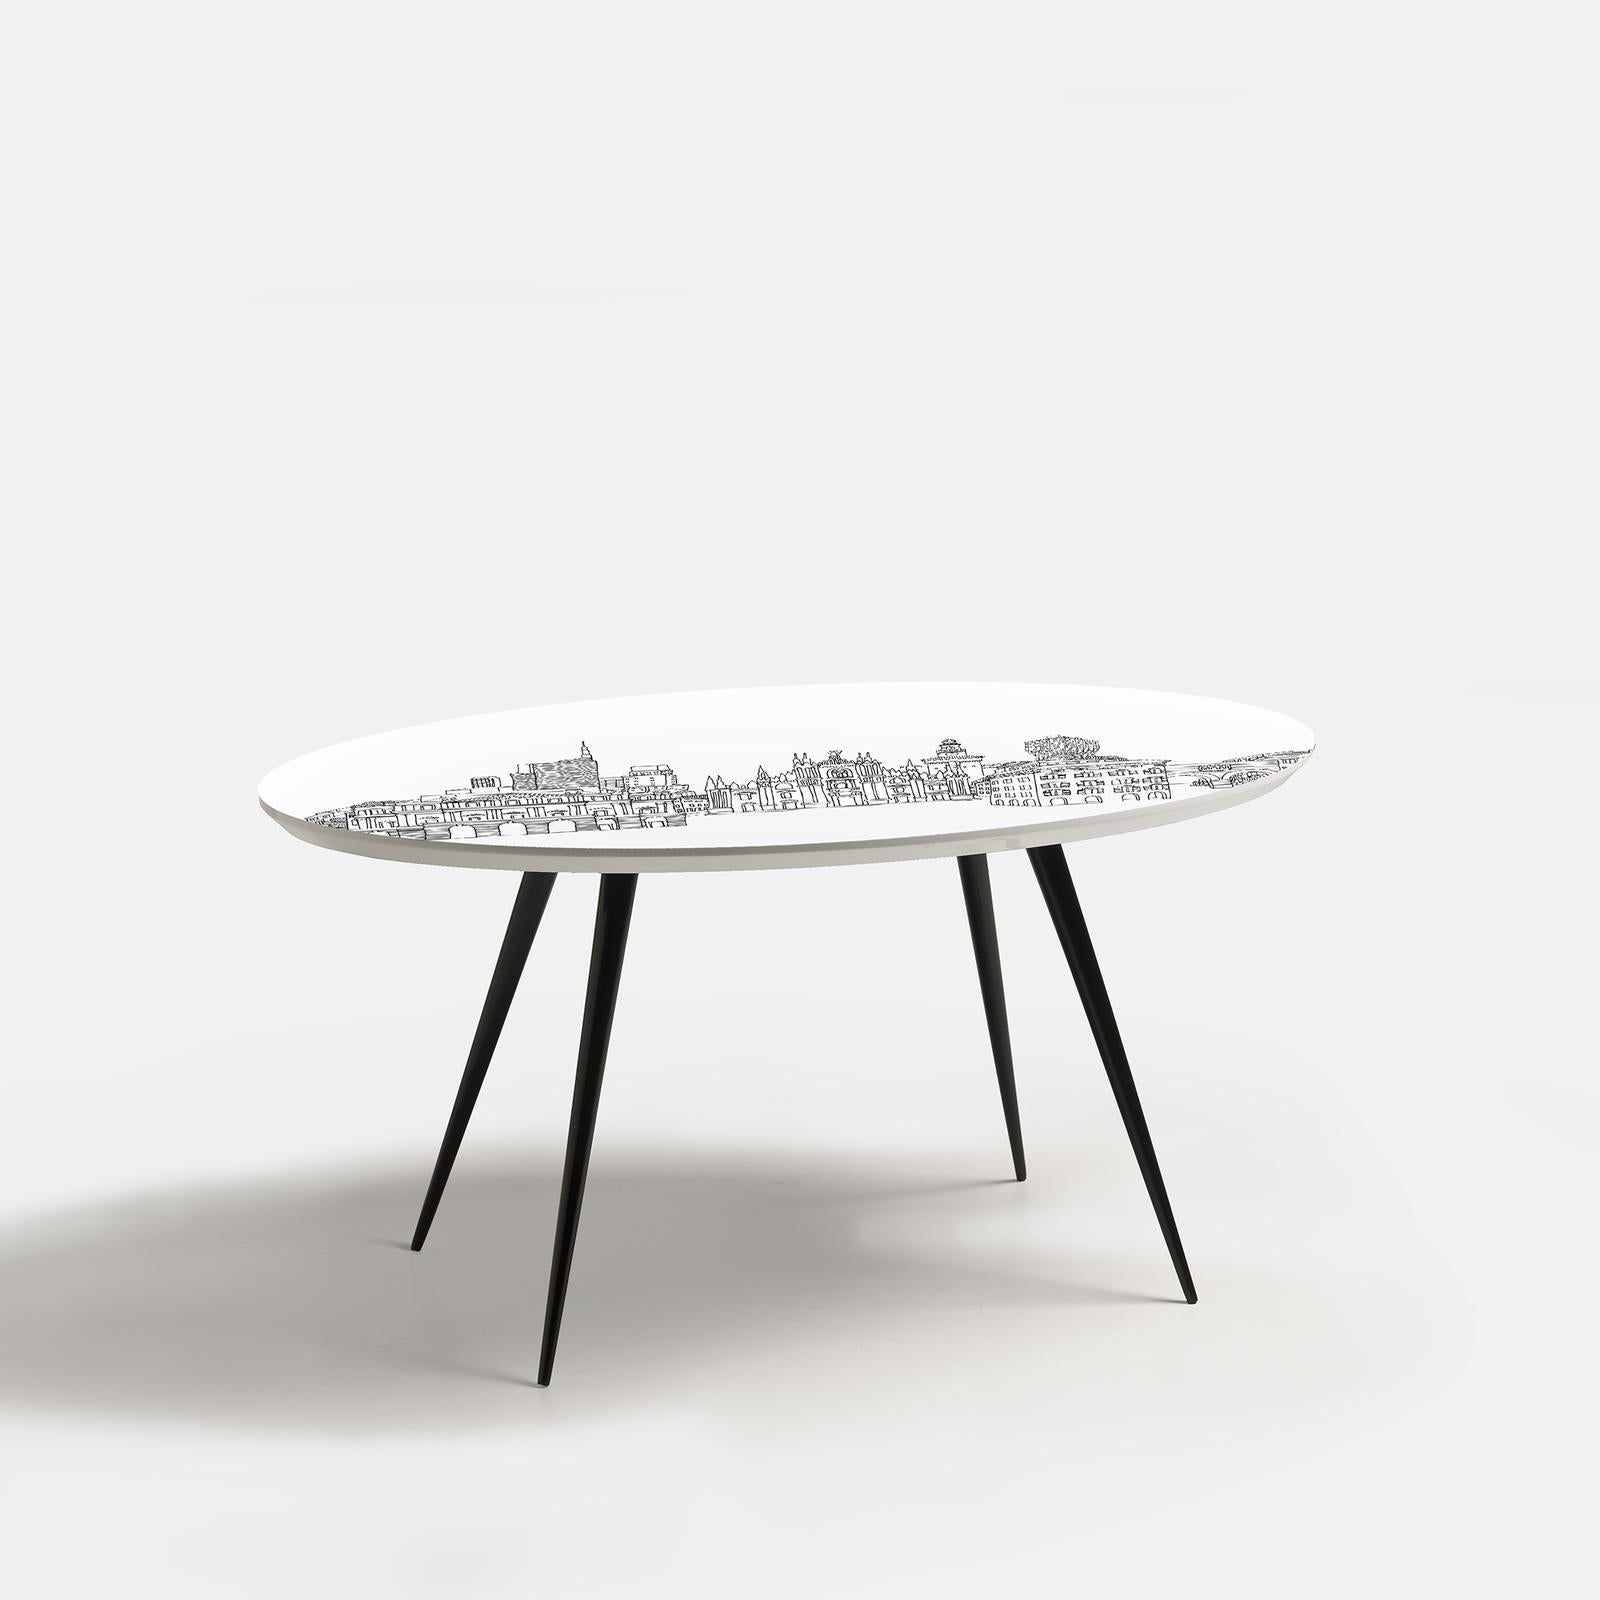 This captivating coffee table by Anna Sutor for Extroverso is part of a new series of coffee tables personally signed by the artist featuring evocative images of the most important Italian cities. Sitting atop four black conical legs, the white